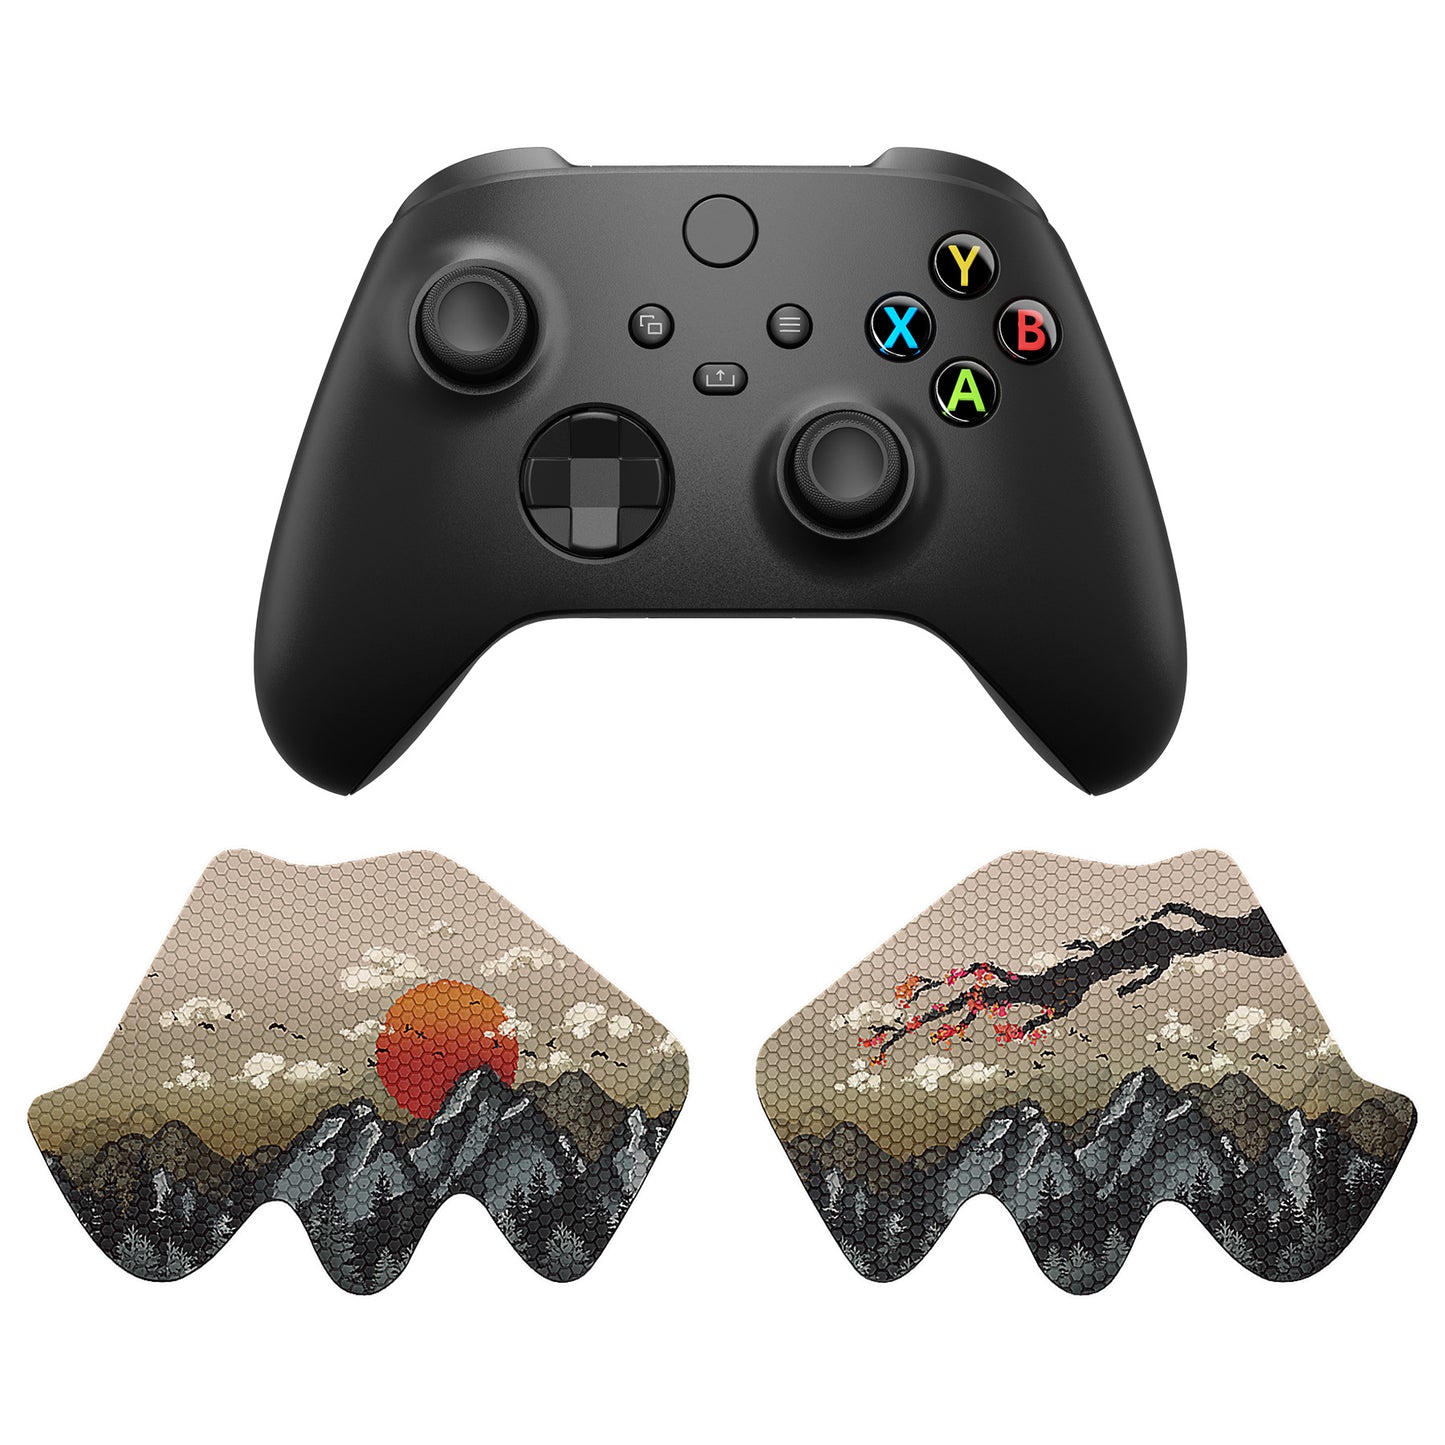 PlayVital View of Rising Sun Anti-Skid Sweat-Absorbent Controller Grip for Xbox Series X/S Controller, Professional Textured Soft Rubber Pads Handle Grips for Xbox Series X/S Controller - X3PJ033 PlayVital